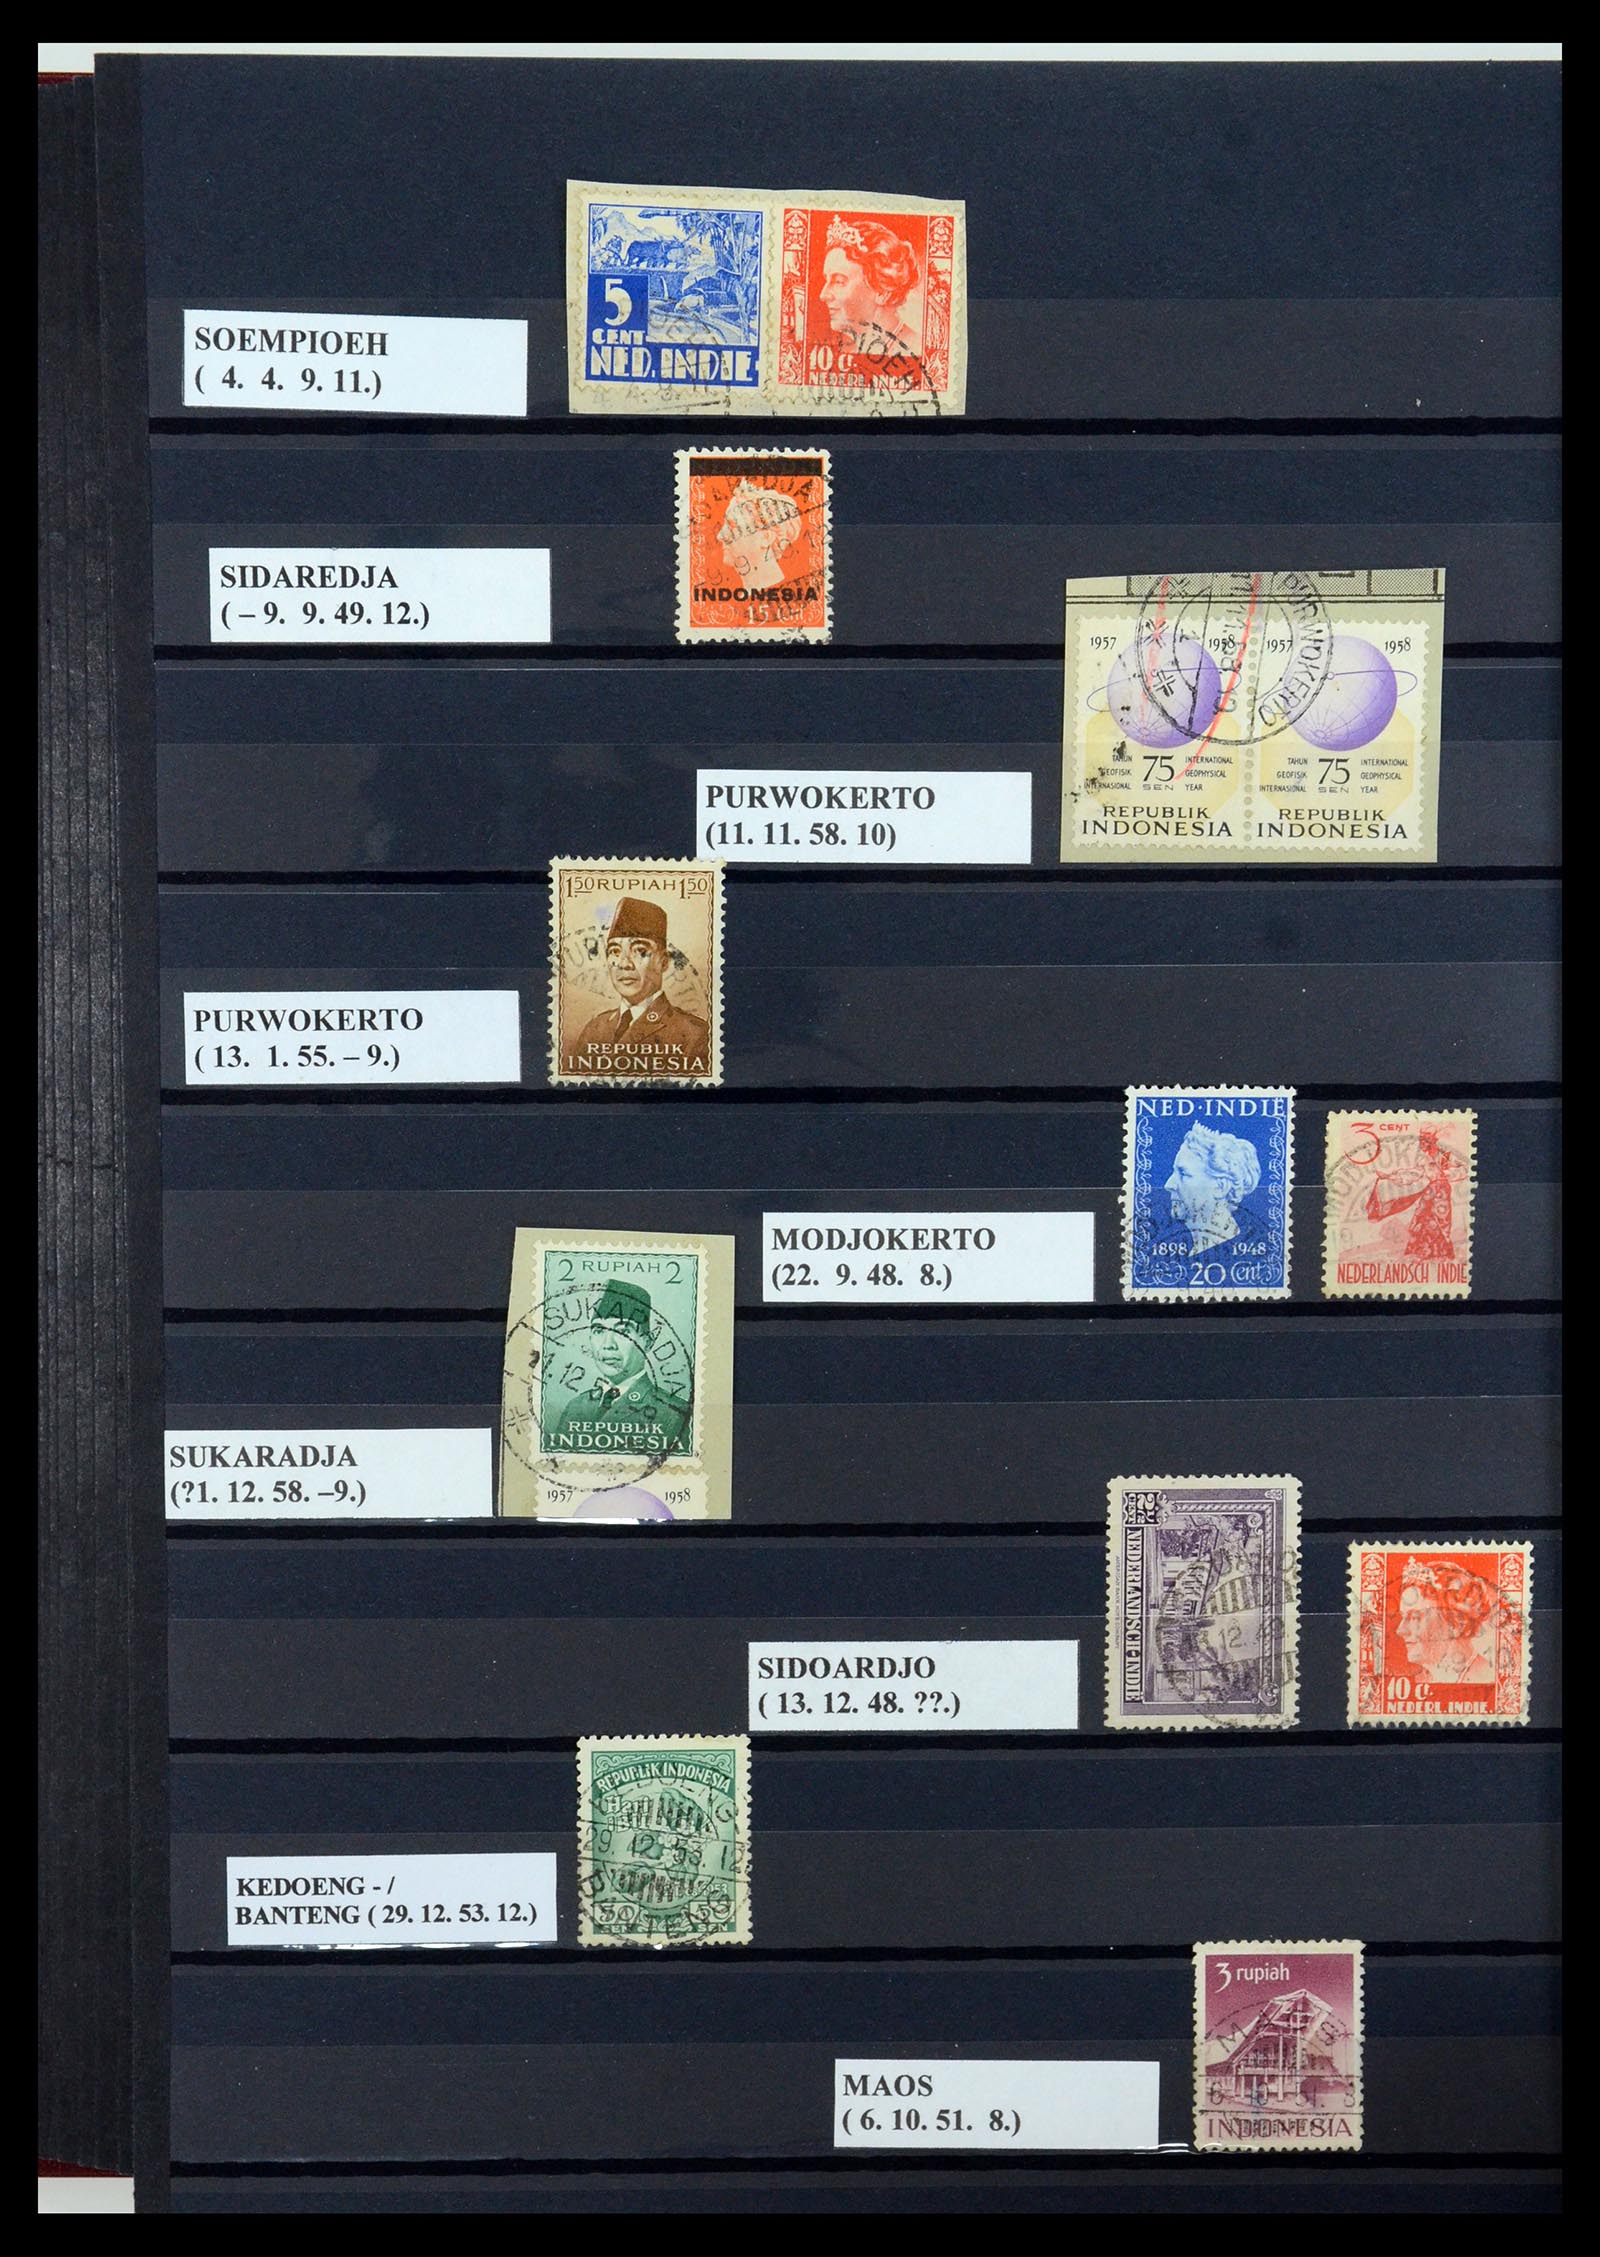 35612 082 - Stamp Collection 35612 Dutch east Indies cancels.